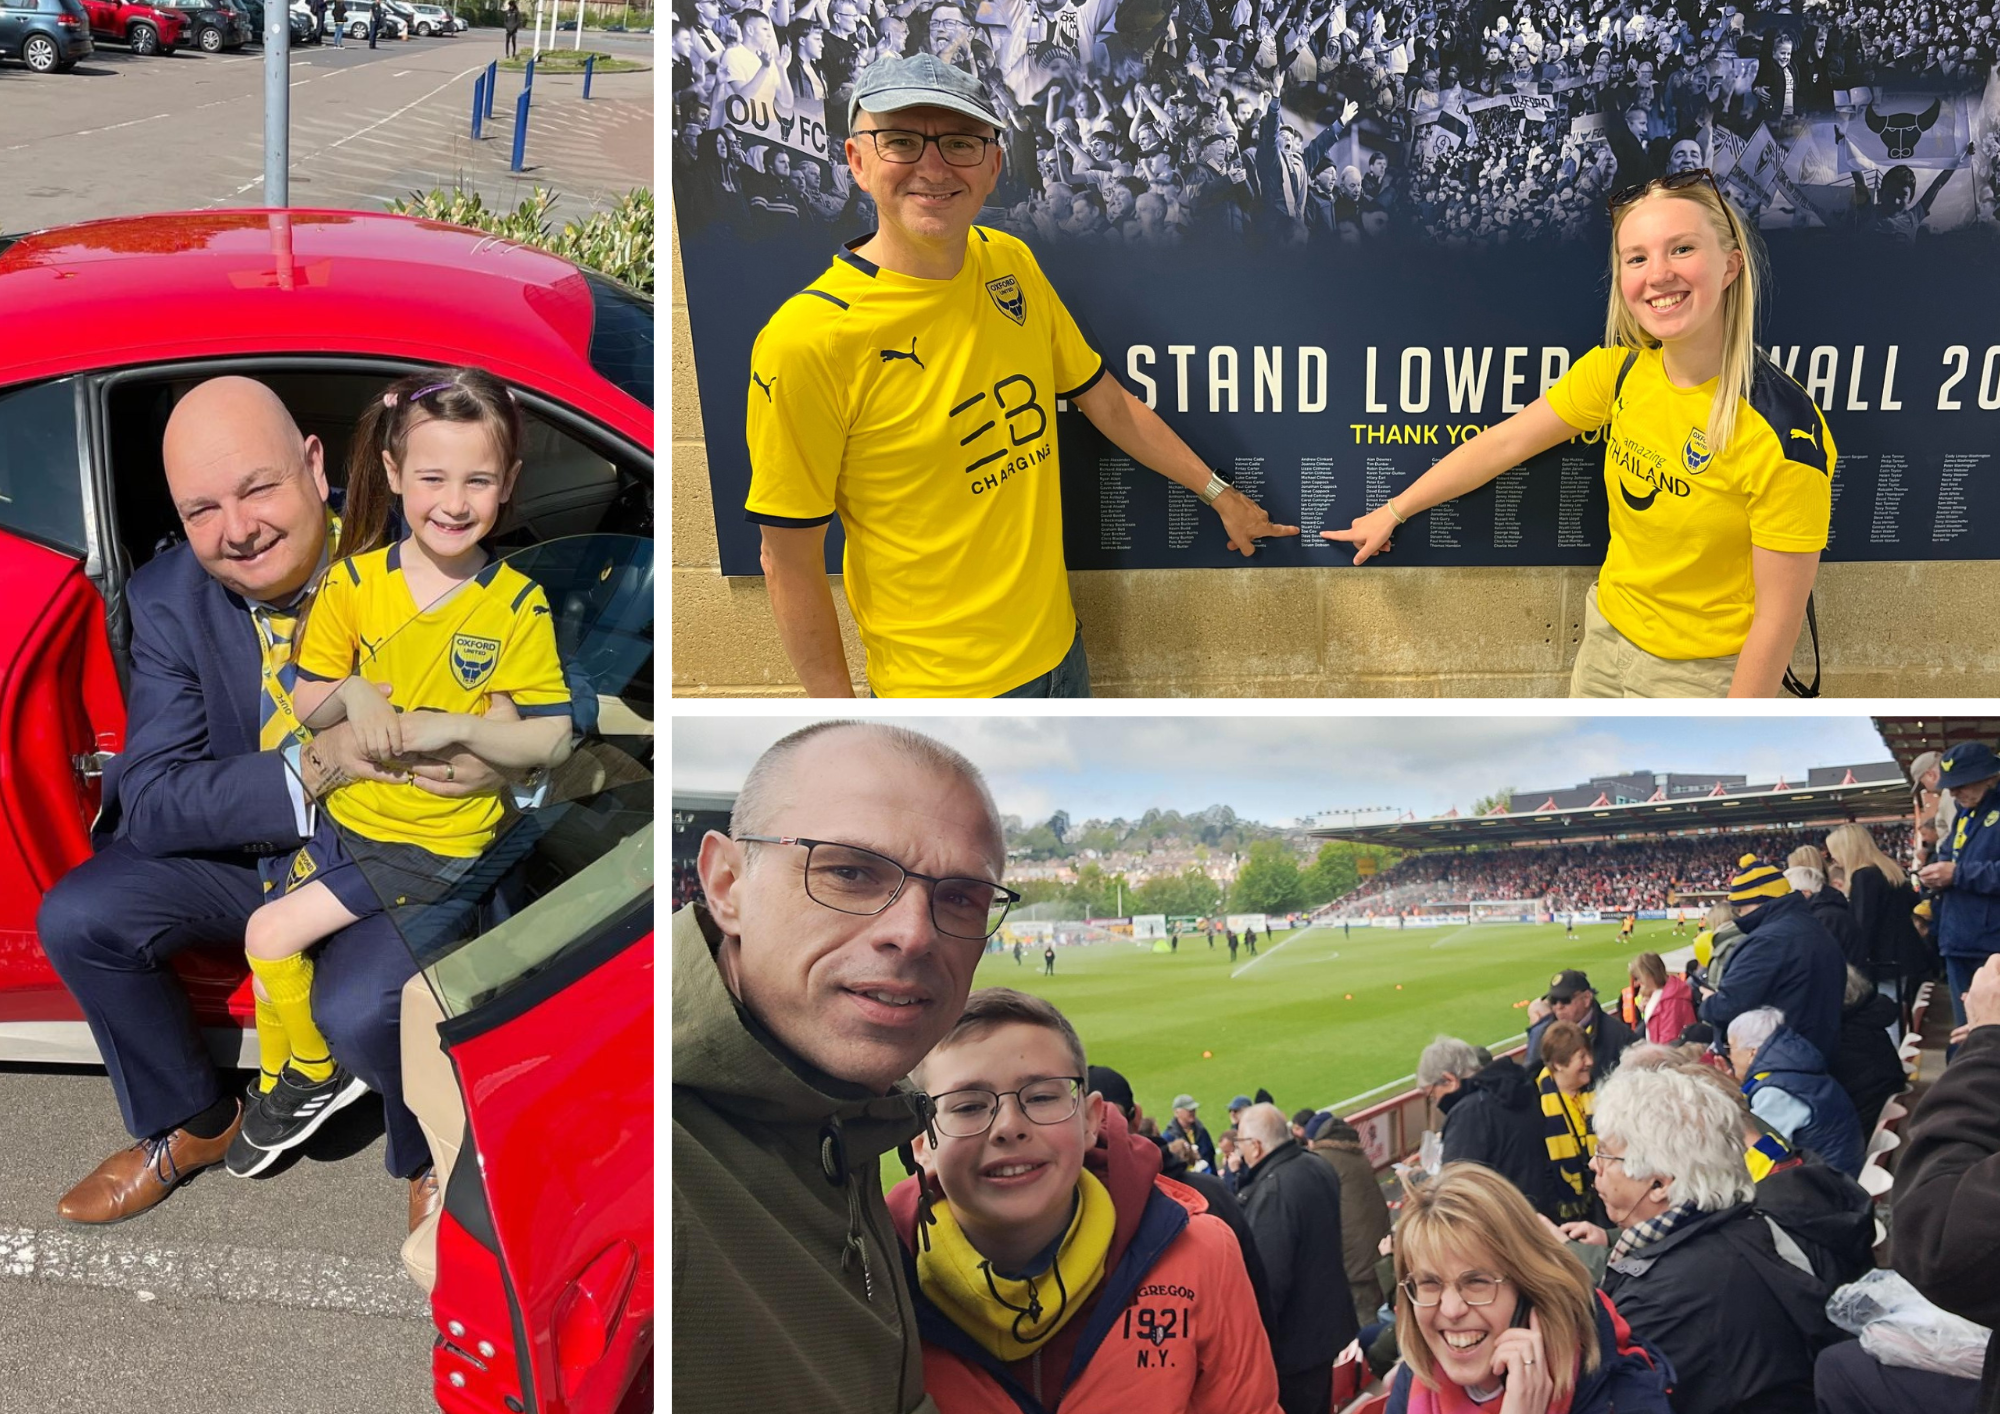 Oxford United fans going to Wembley from USA, Australia and more